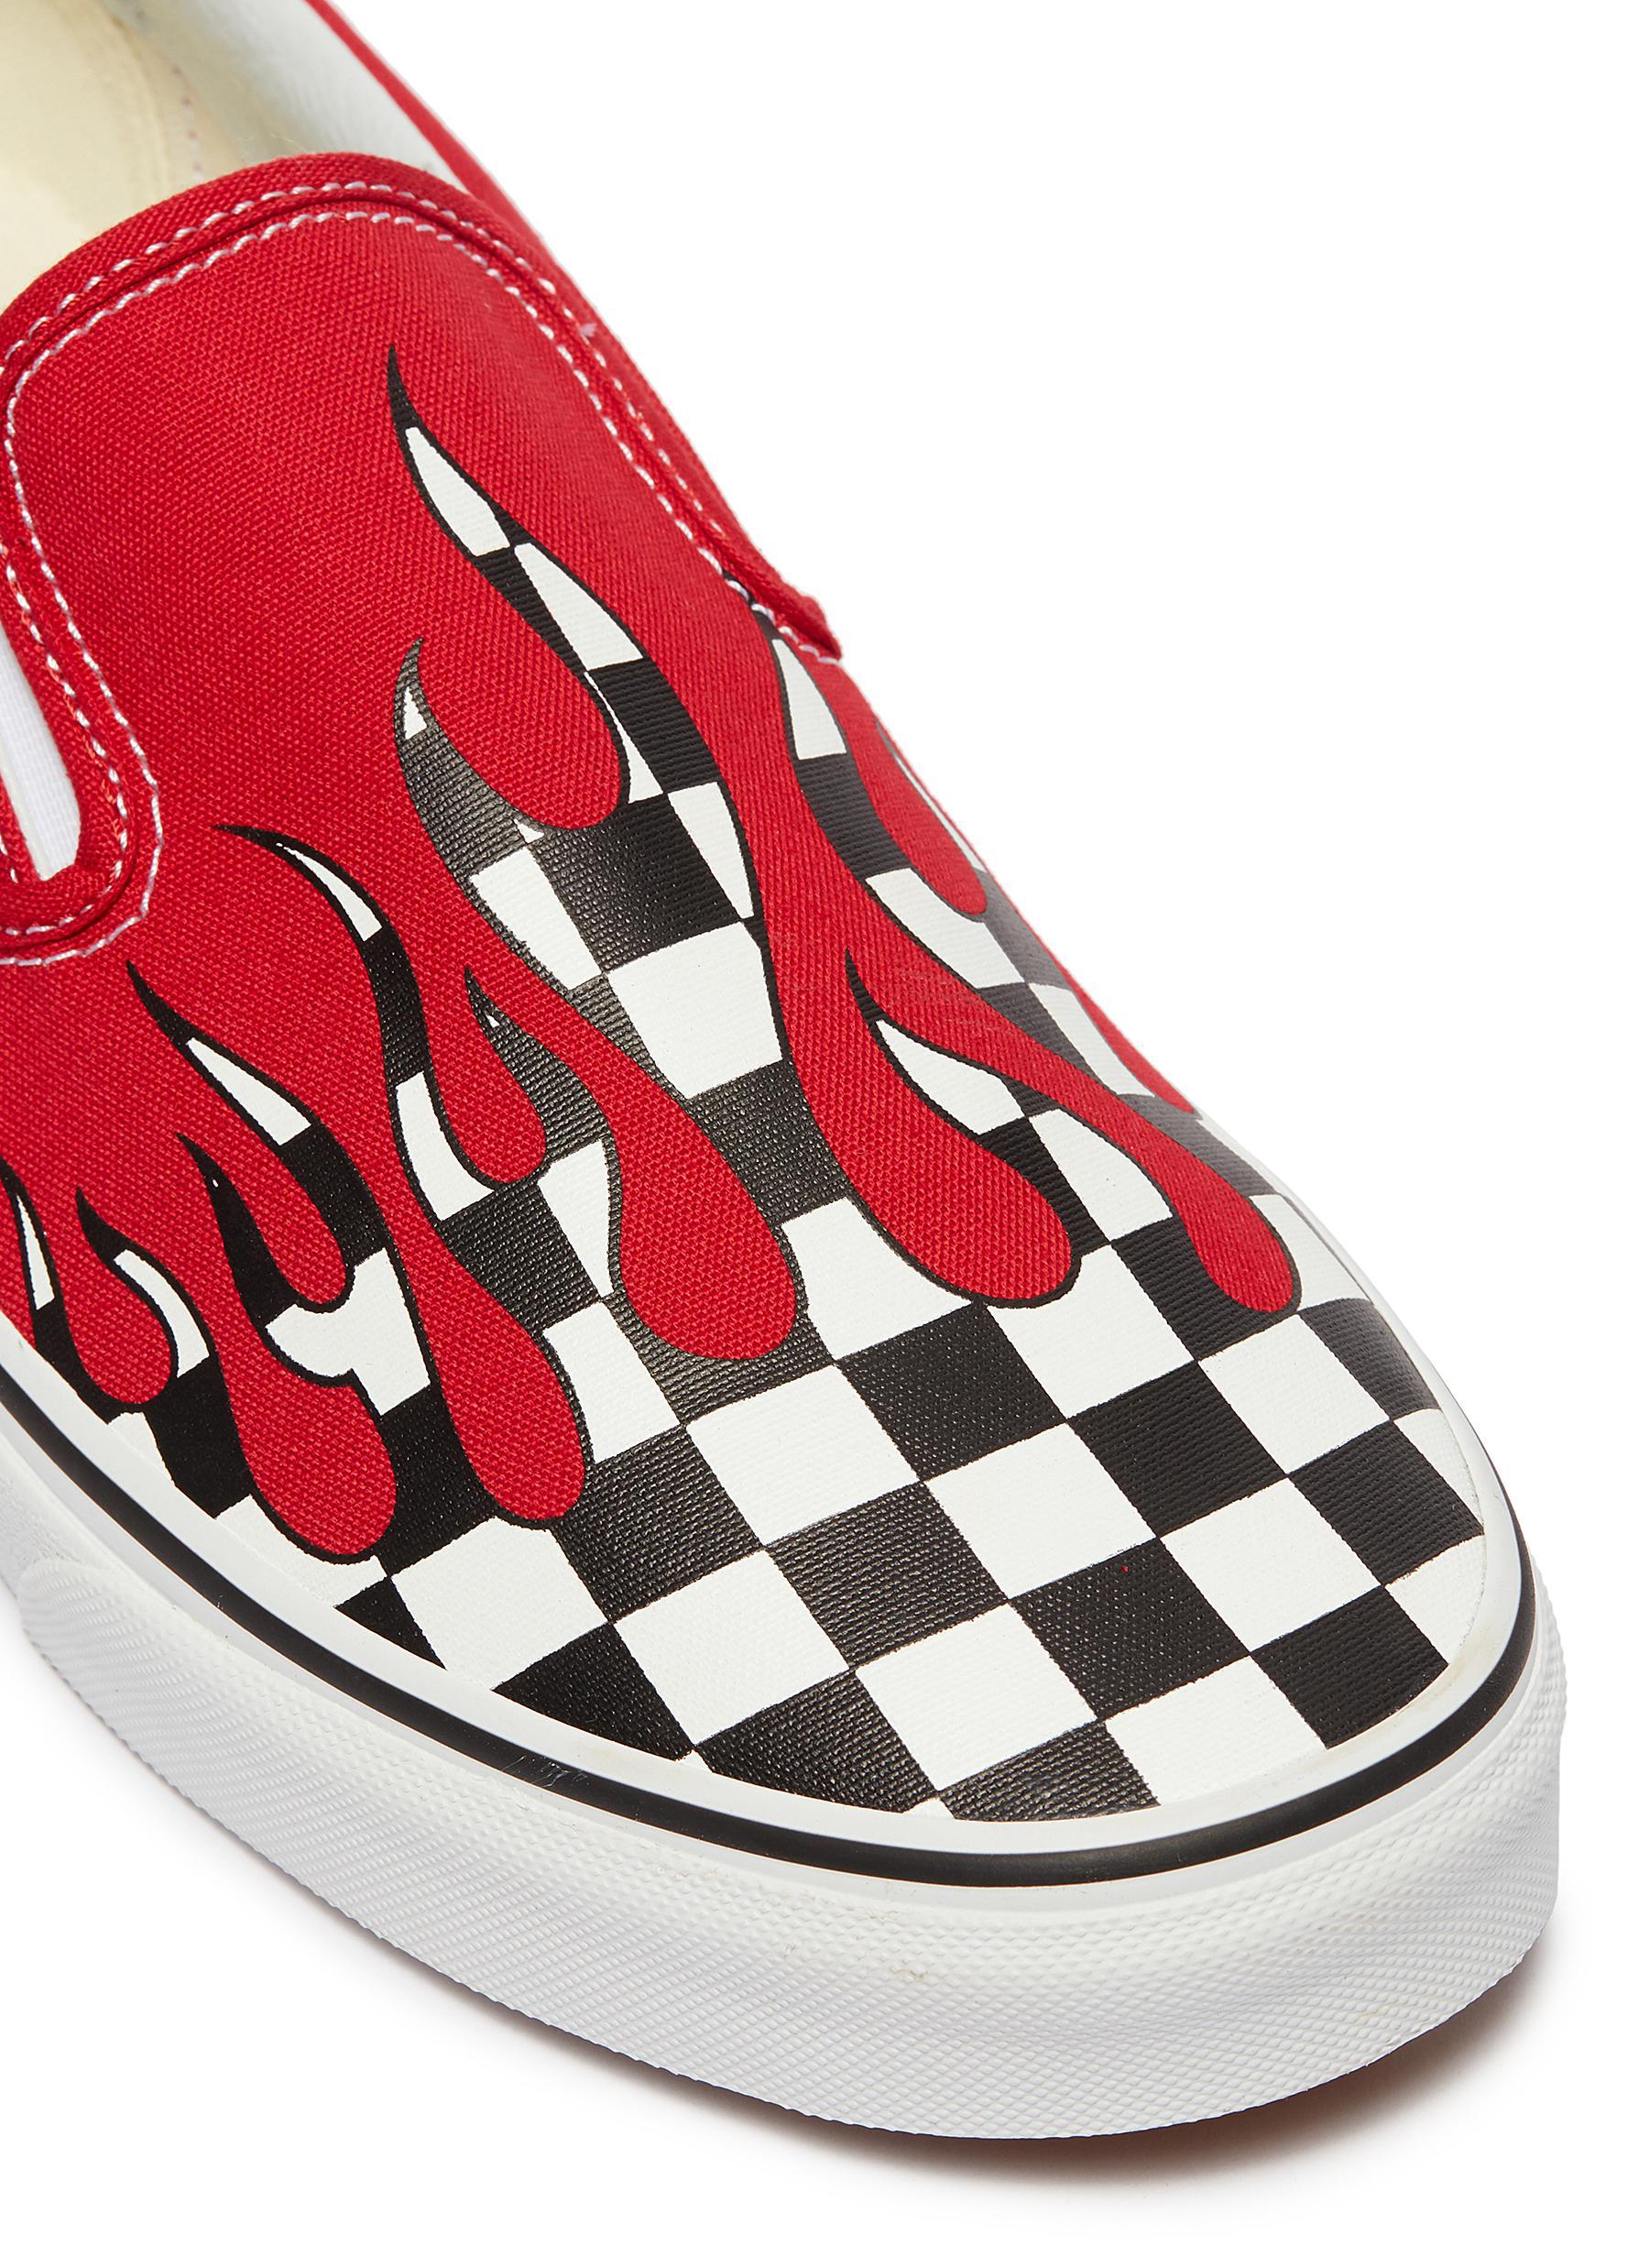 red checkered vans flame \u003e Up to 66 